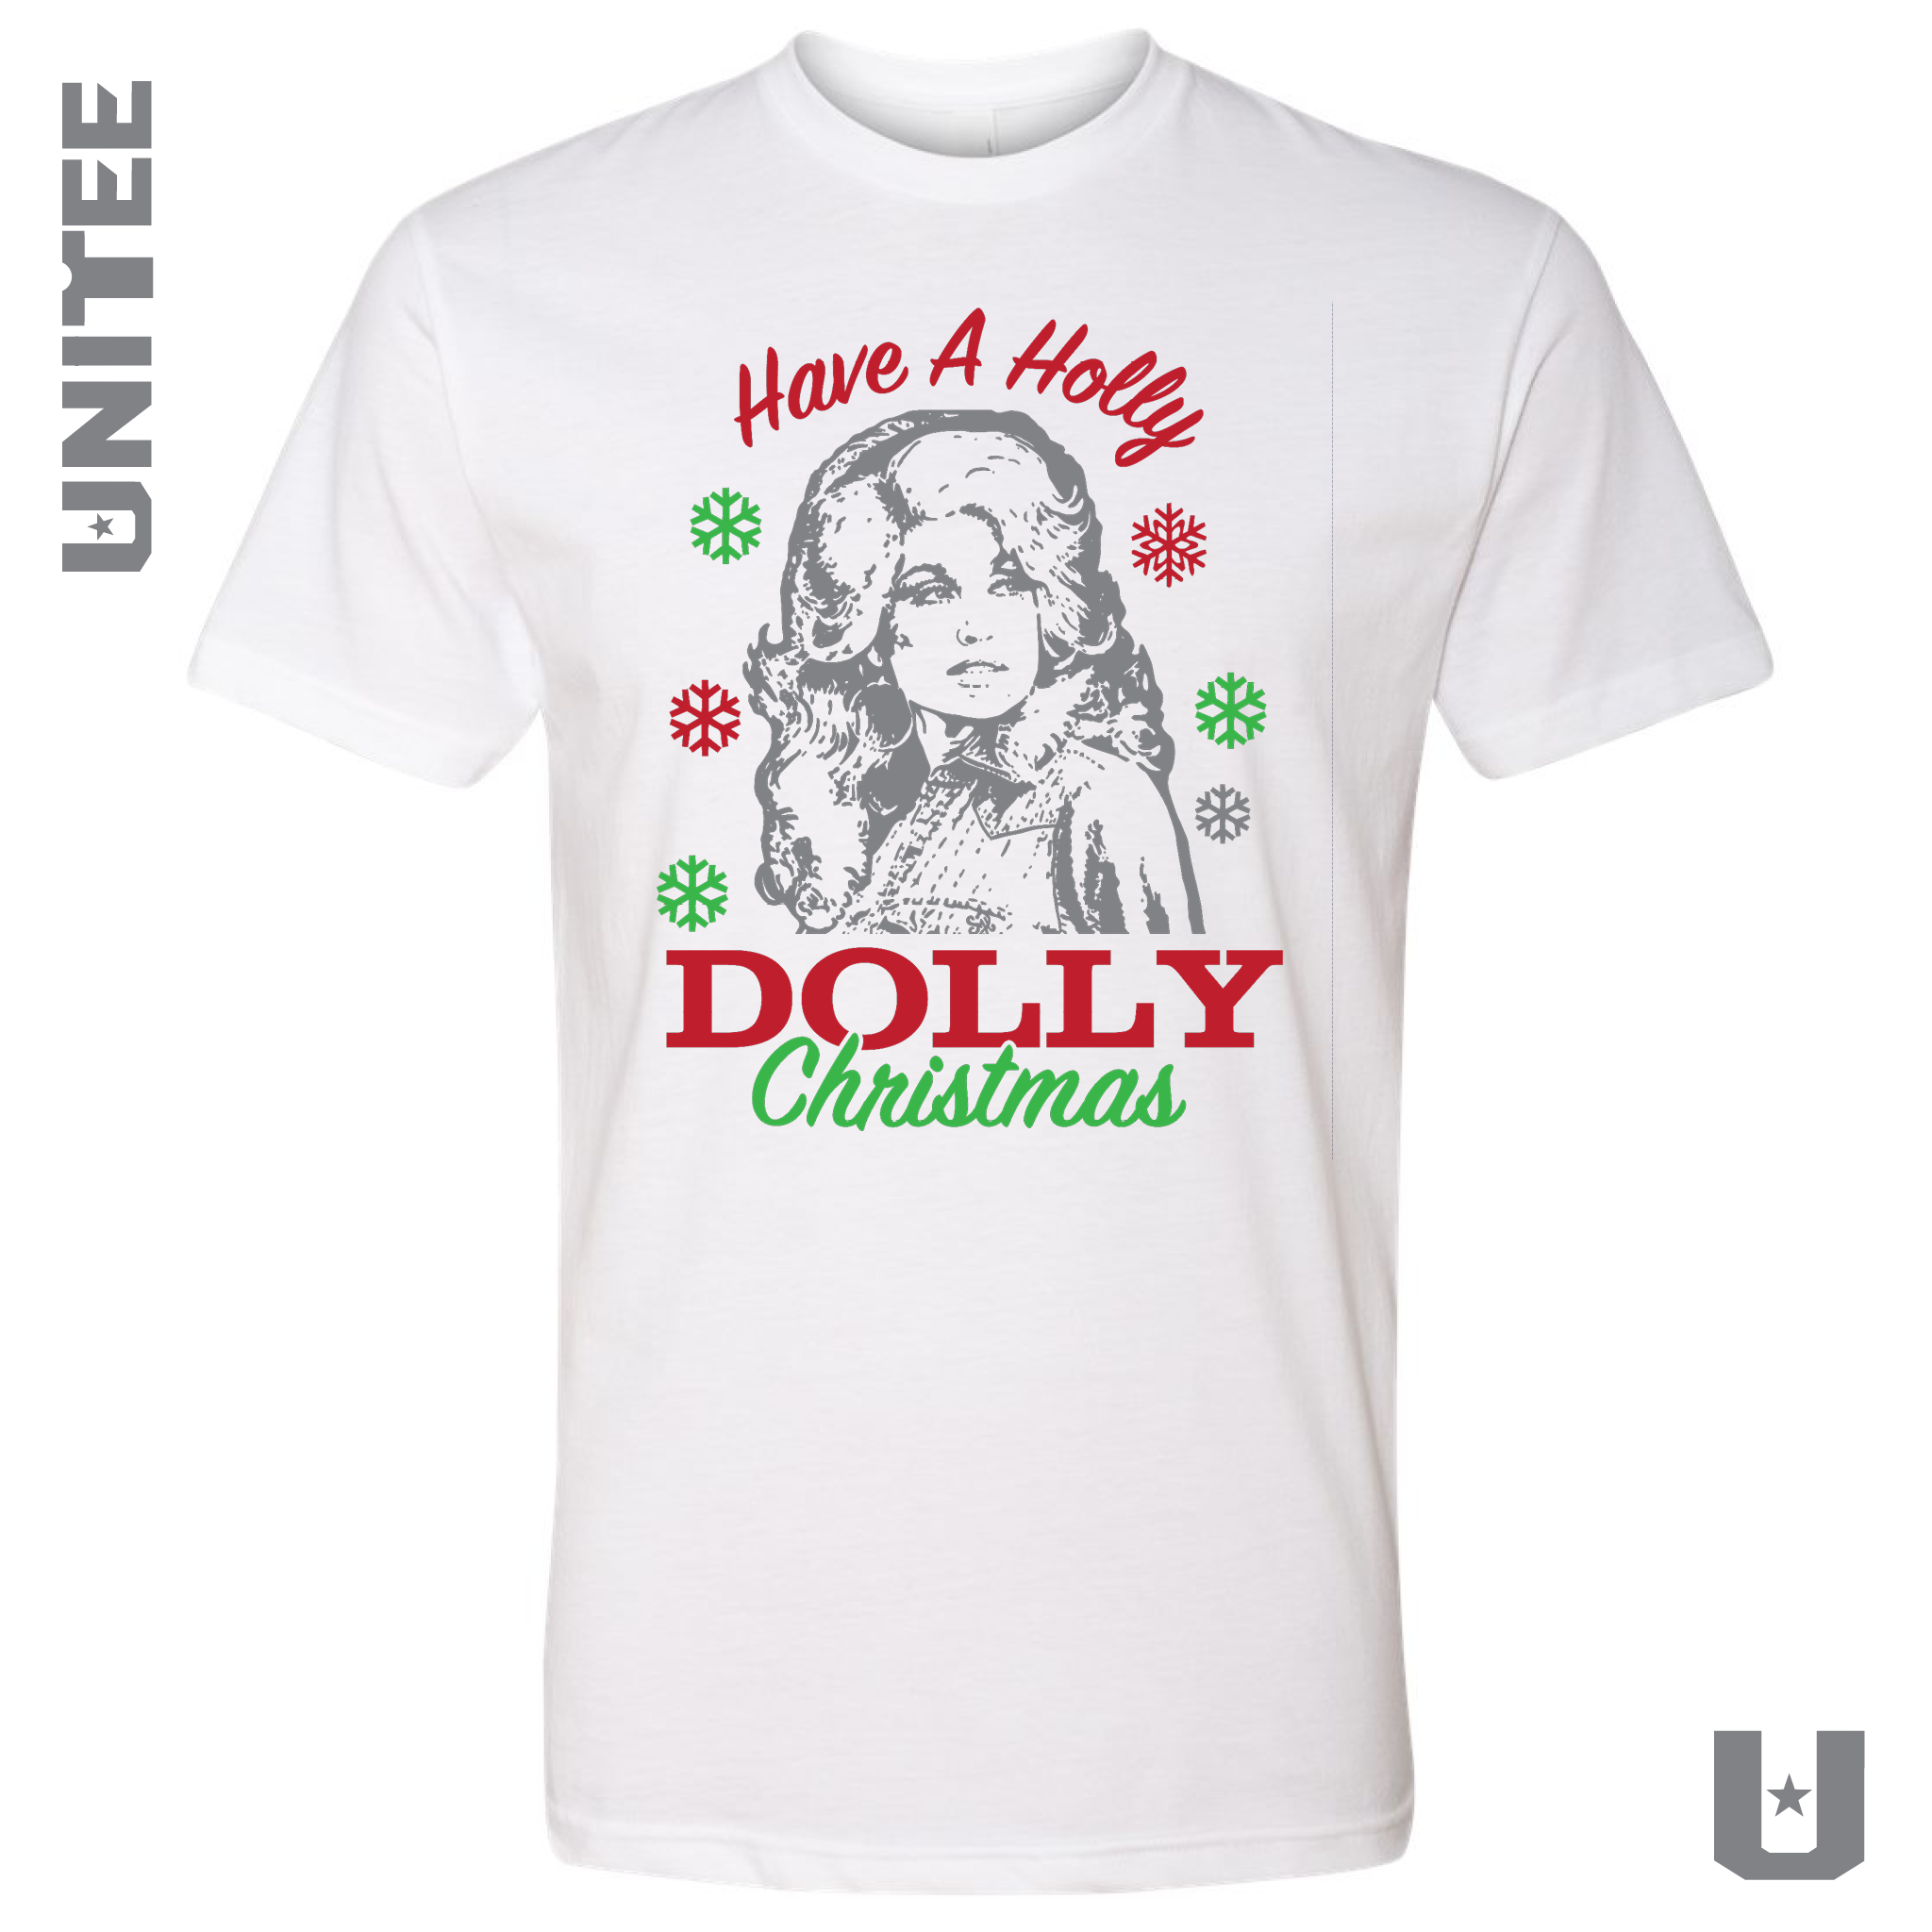 Have A Holly Dolly Christmas Tshirt